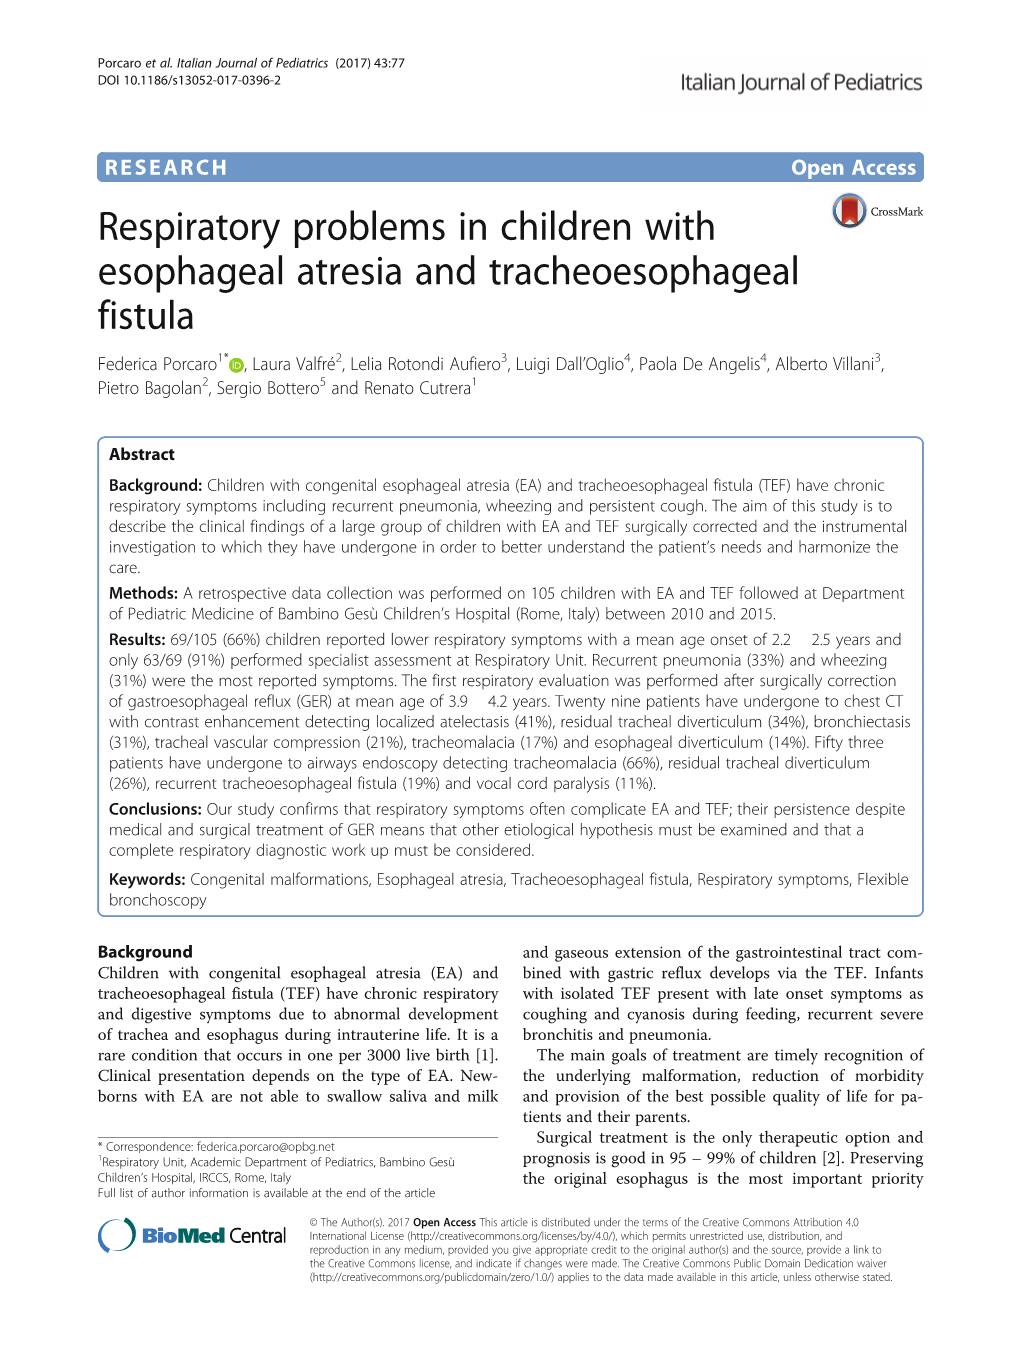 Respiratory Problems in Children with Esophageal Atresia And